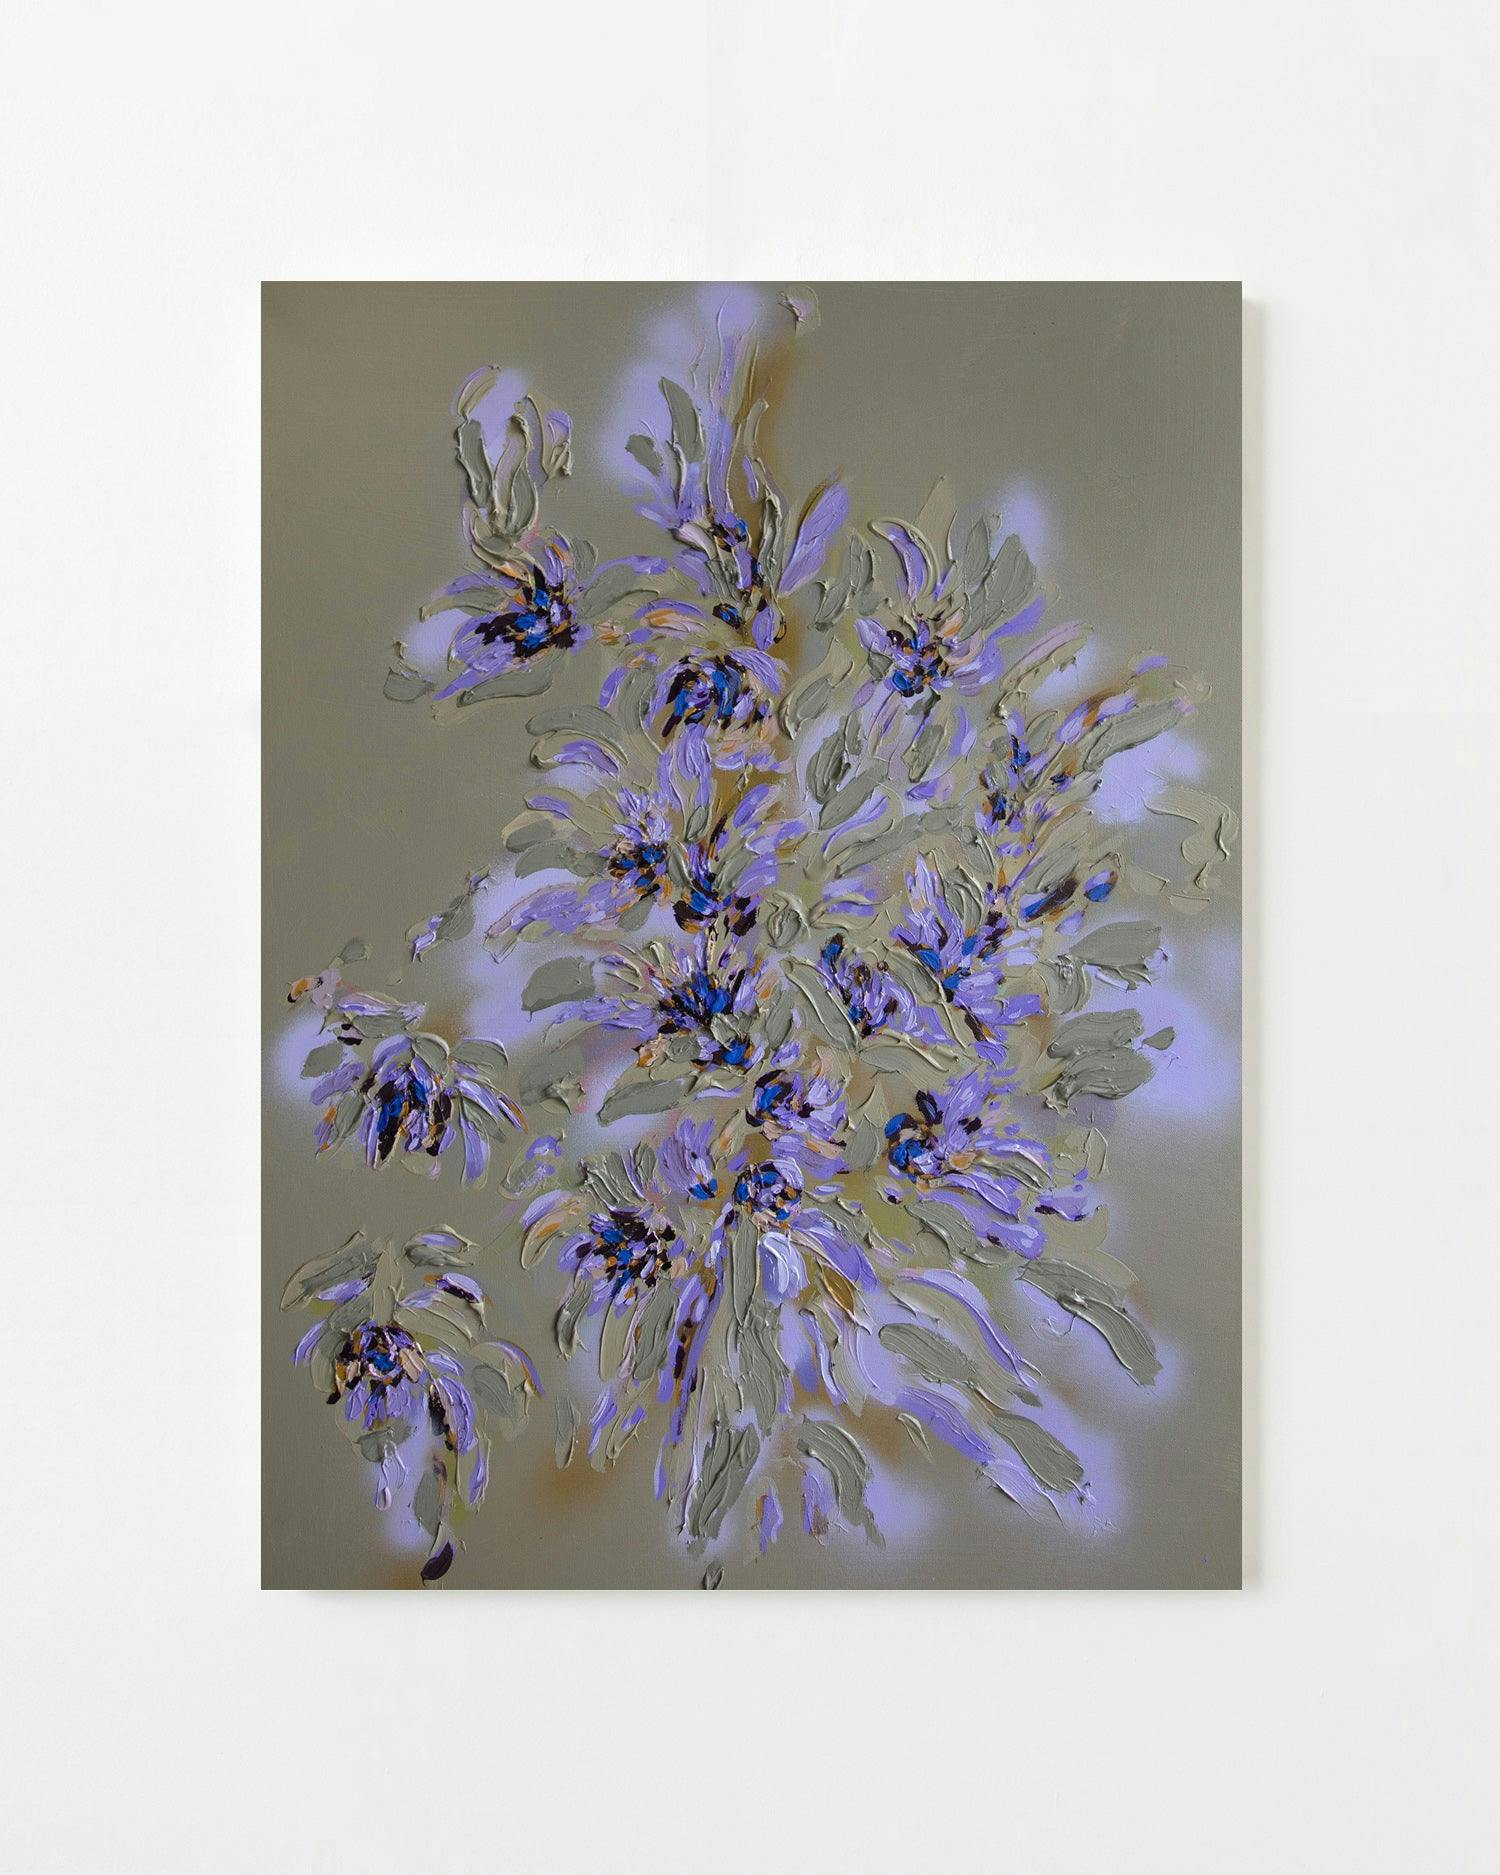 Painting by Erin Lynn Welsh titled "Botany Mono 84".